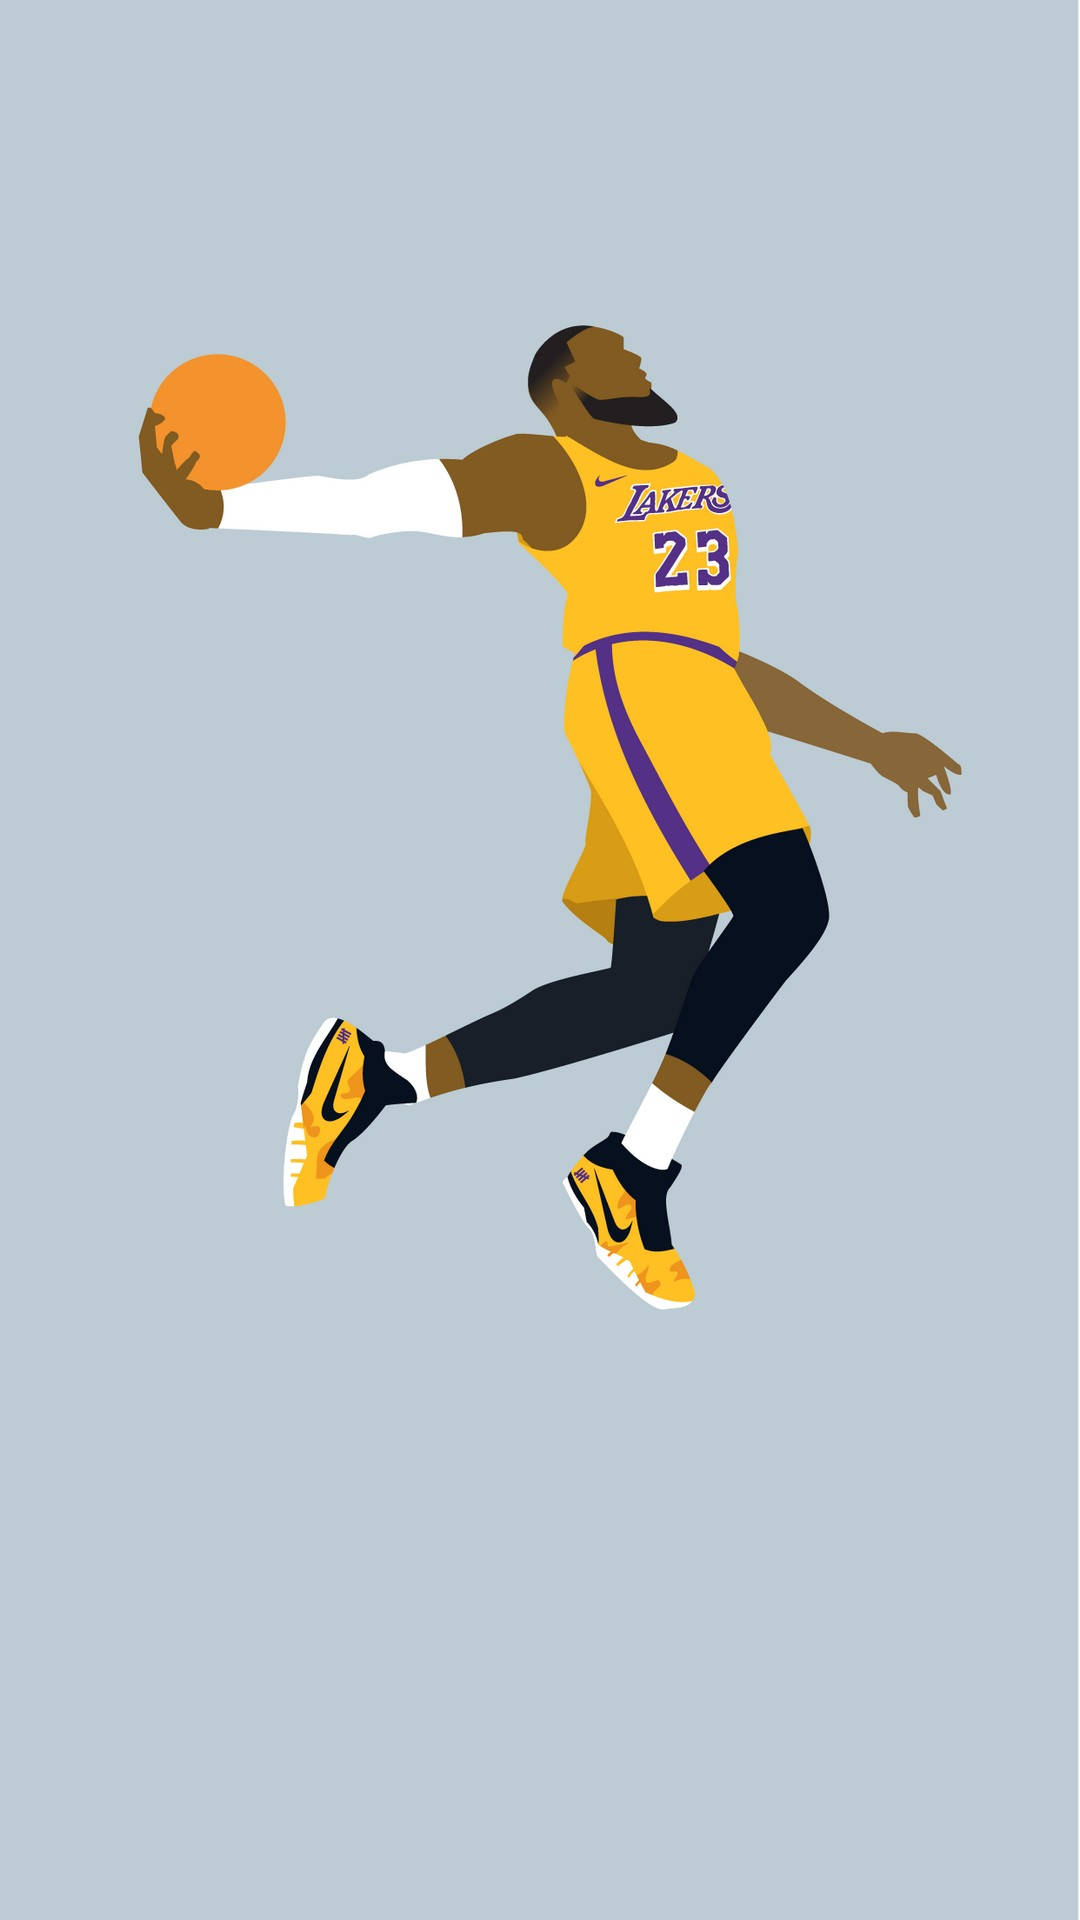 Download Lakers Iphone With Lebron Dunking Wallpaper